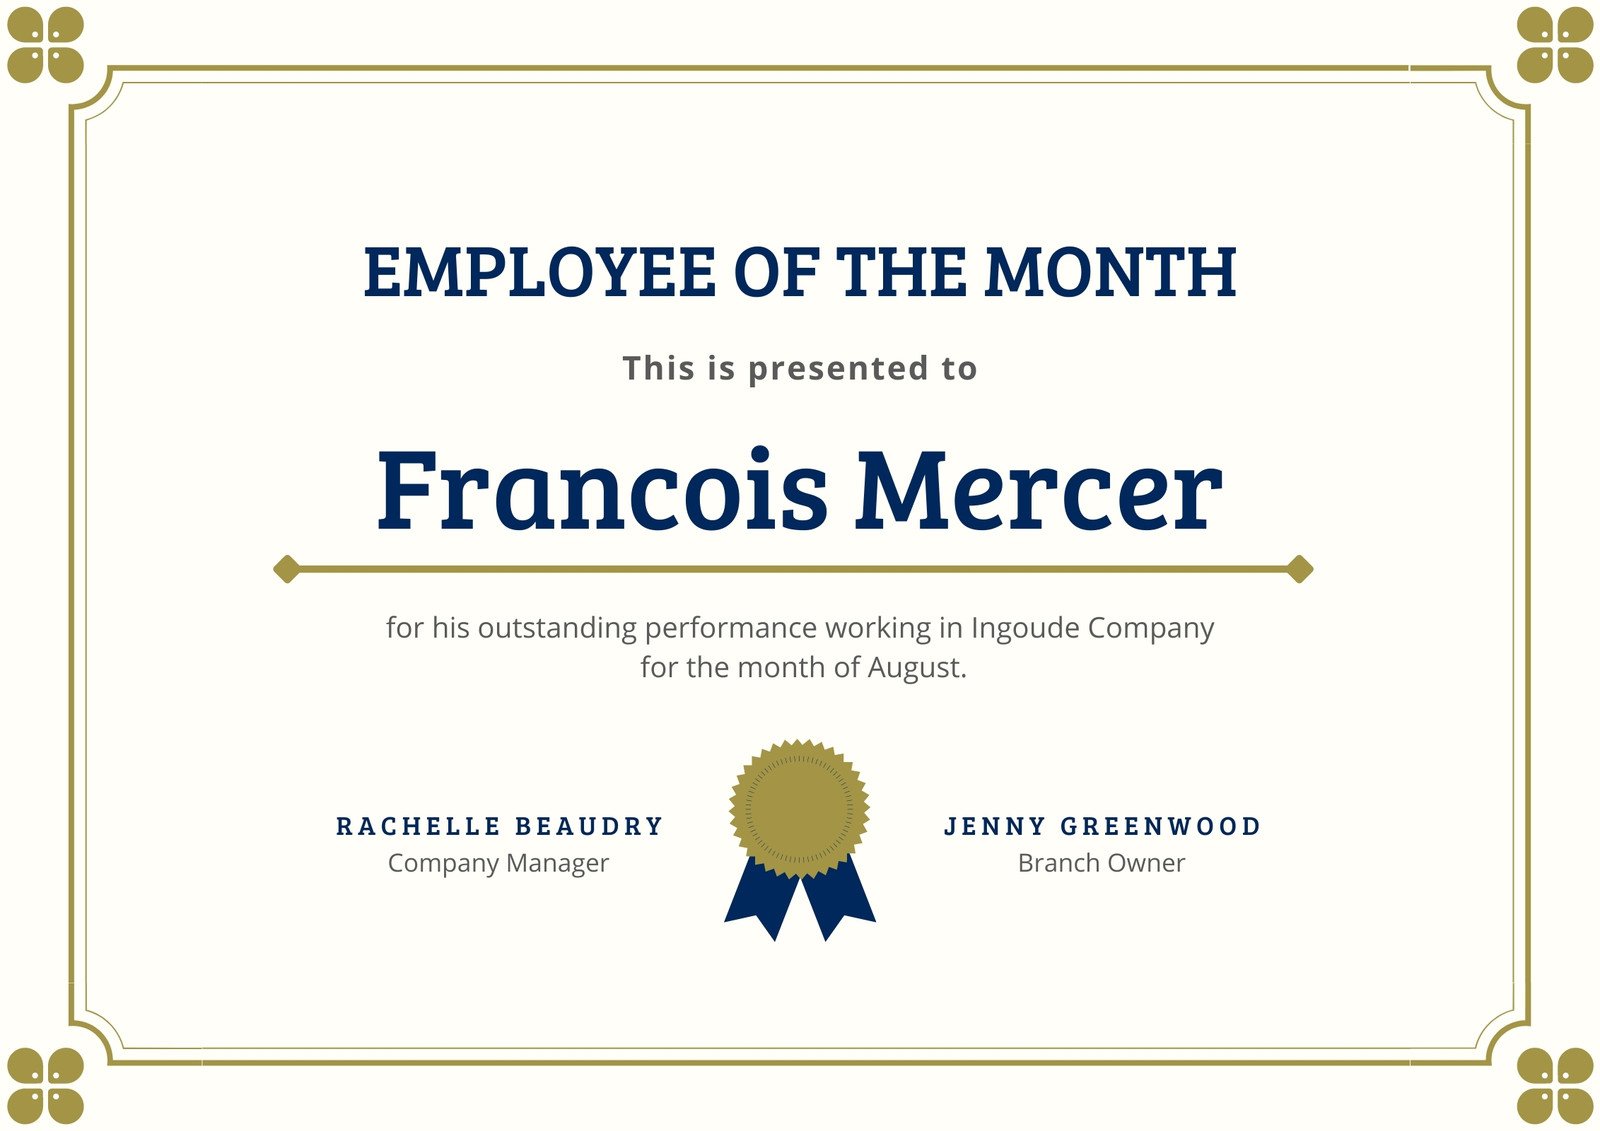 Free printable employee of the month certificate templates  Canva Throughout Employee Of The Month Certificate Template With Picture